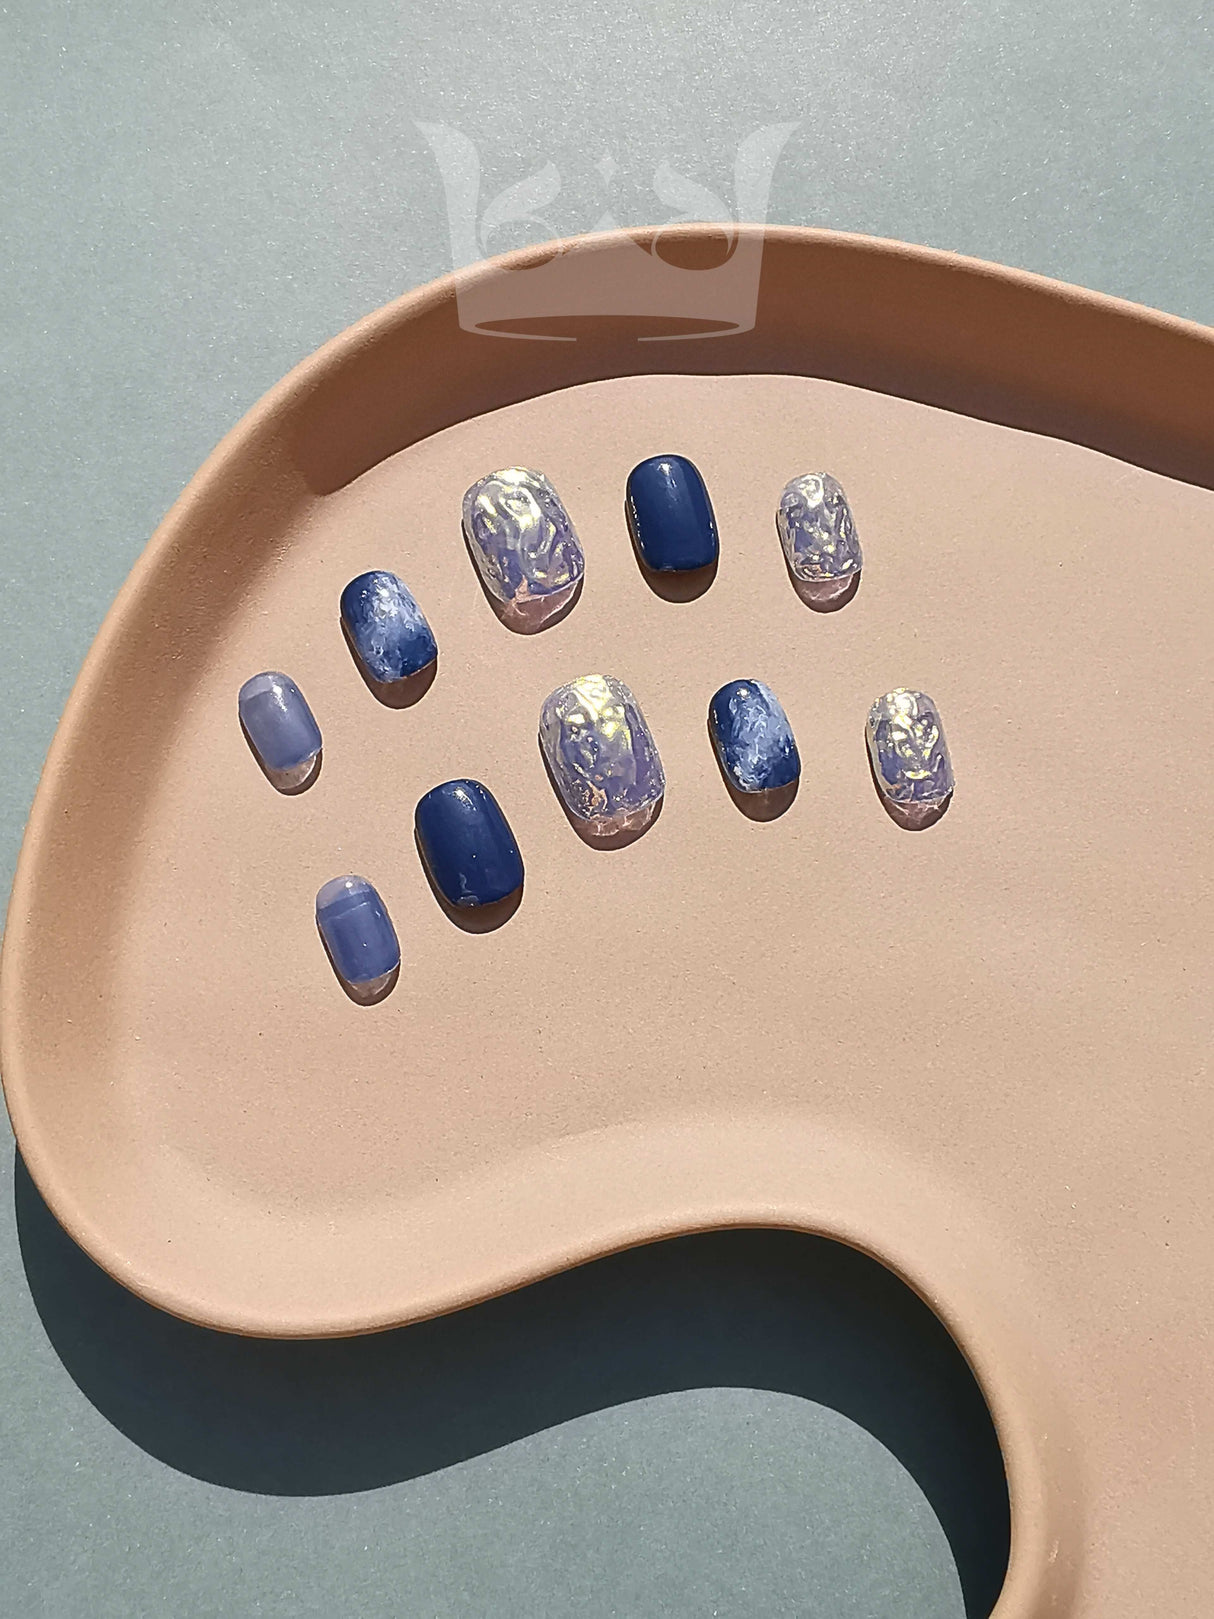 The image shows oval-shaped nails. The design elements include shape, color, and texture, creating a minimalist and elegant look.